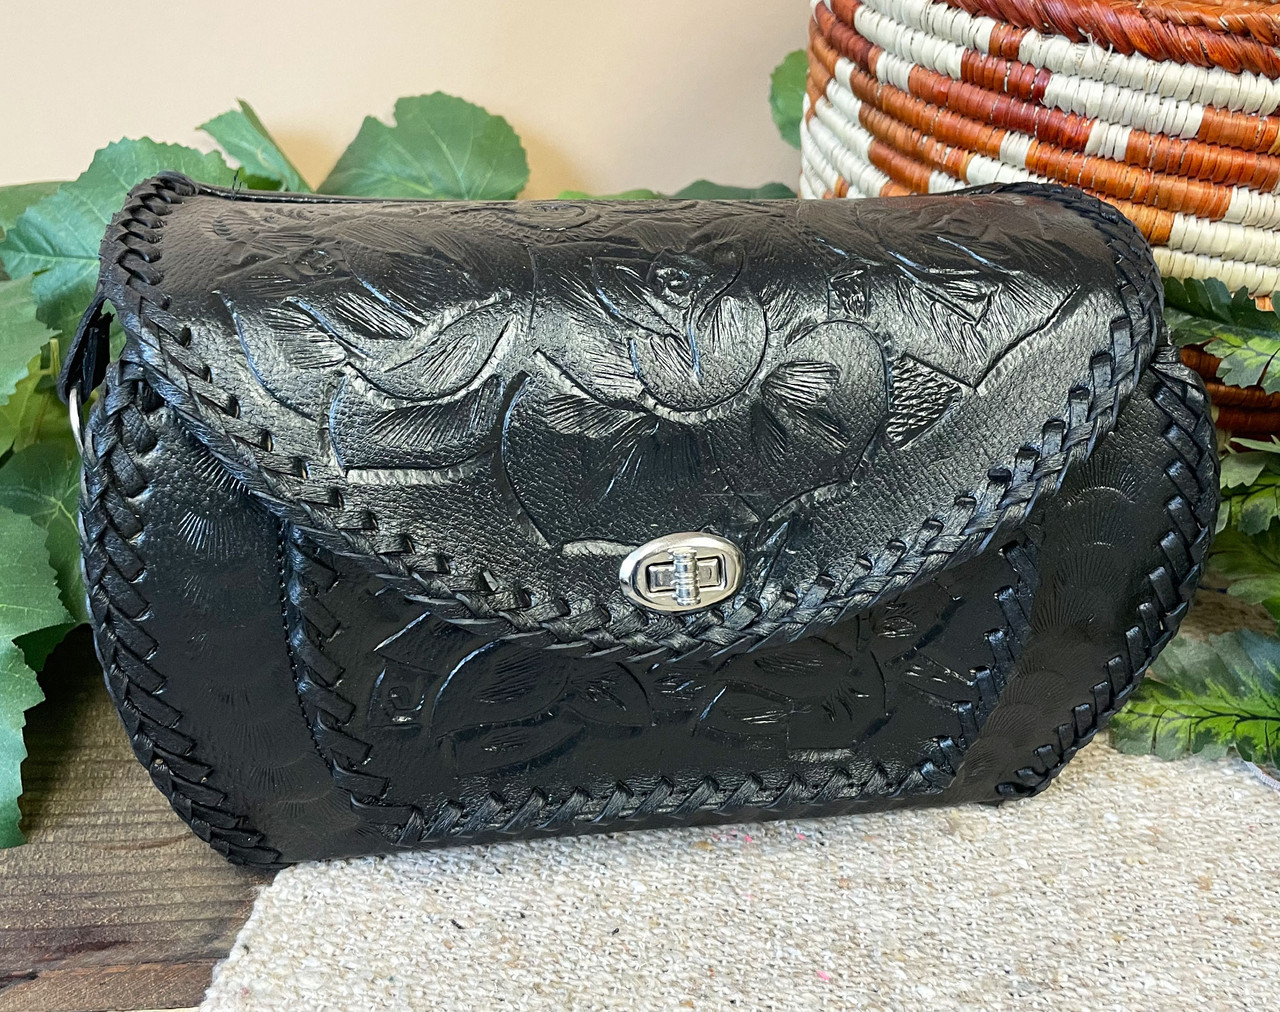 Hand Tooled Leather Bag